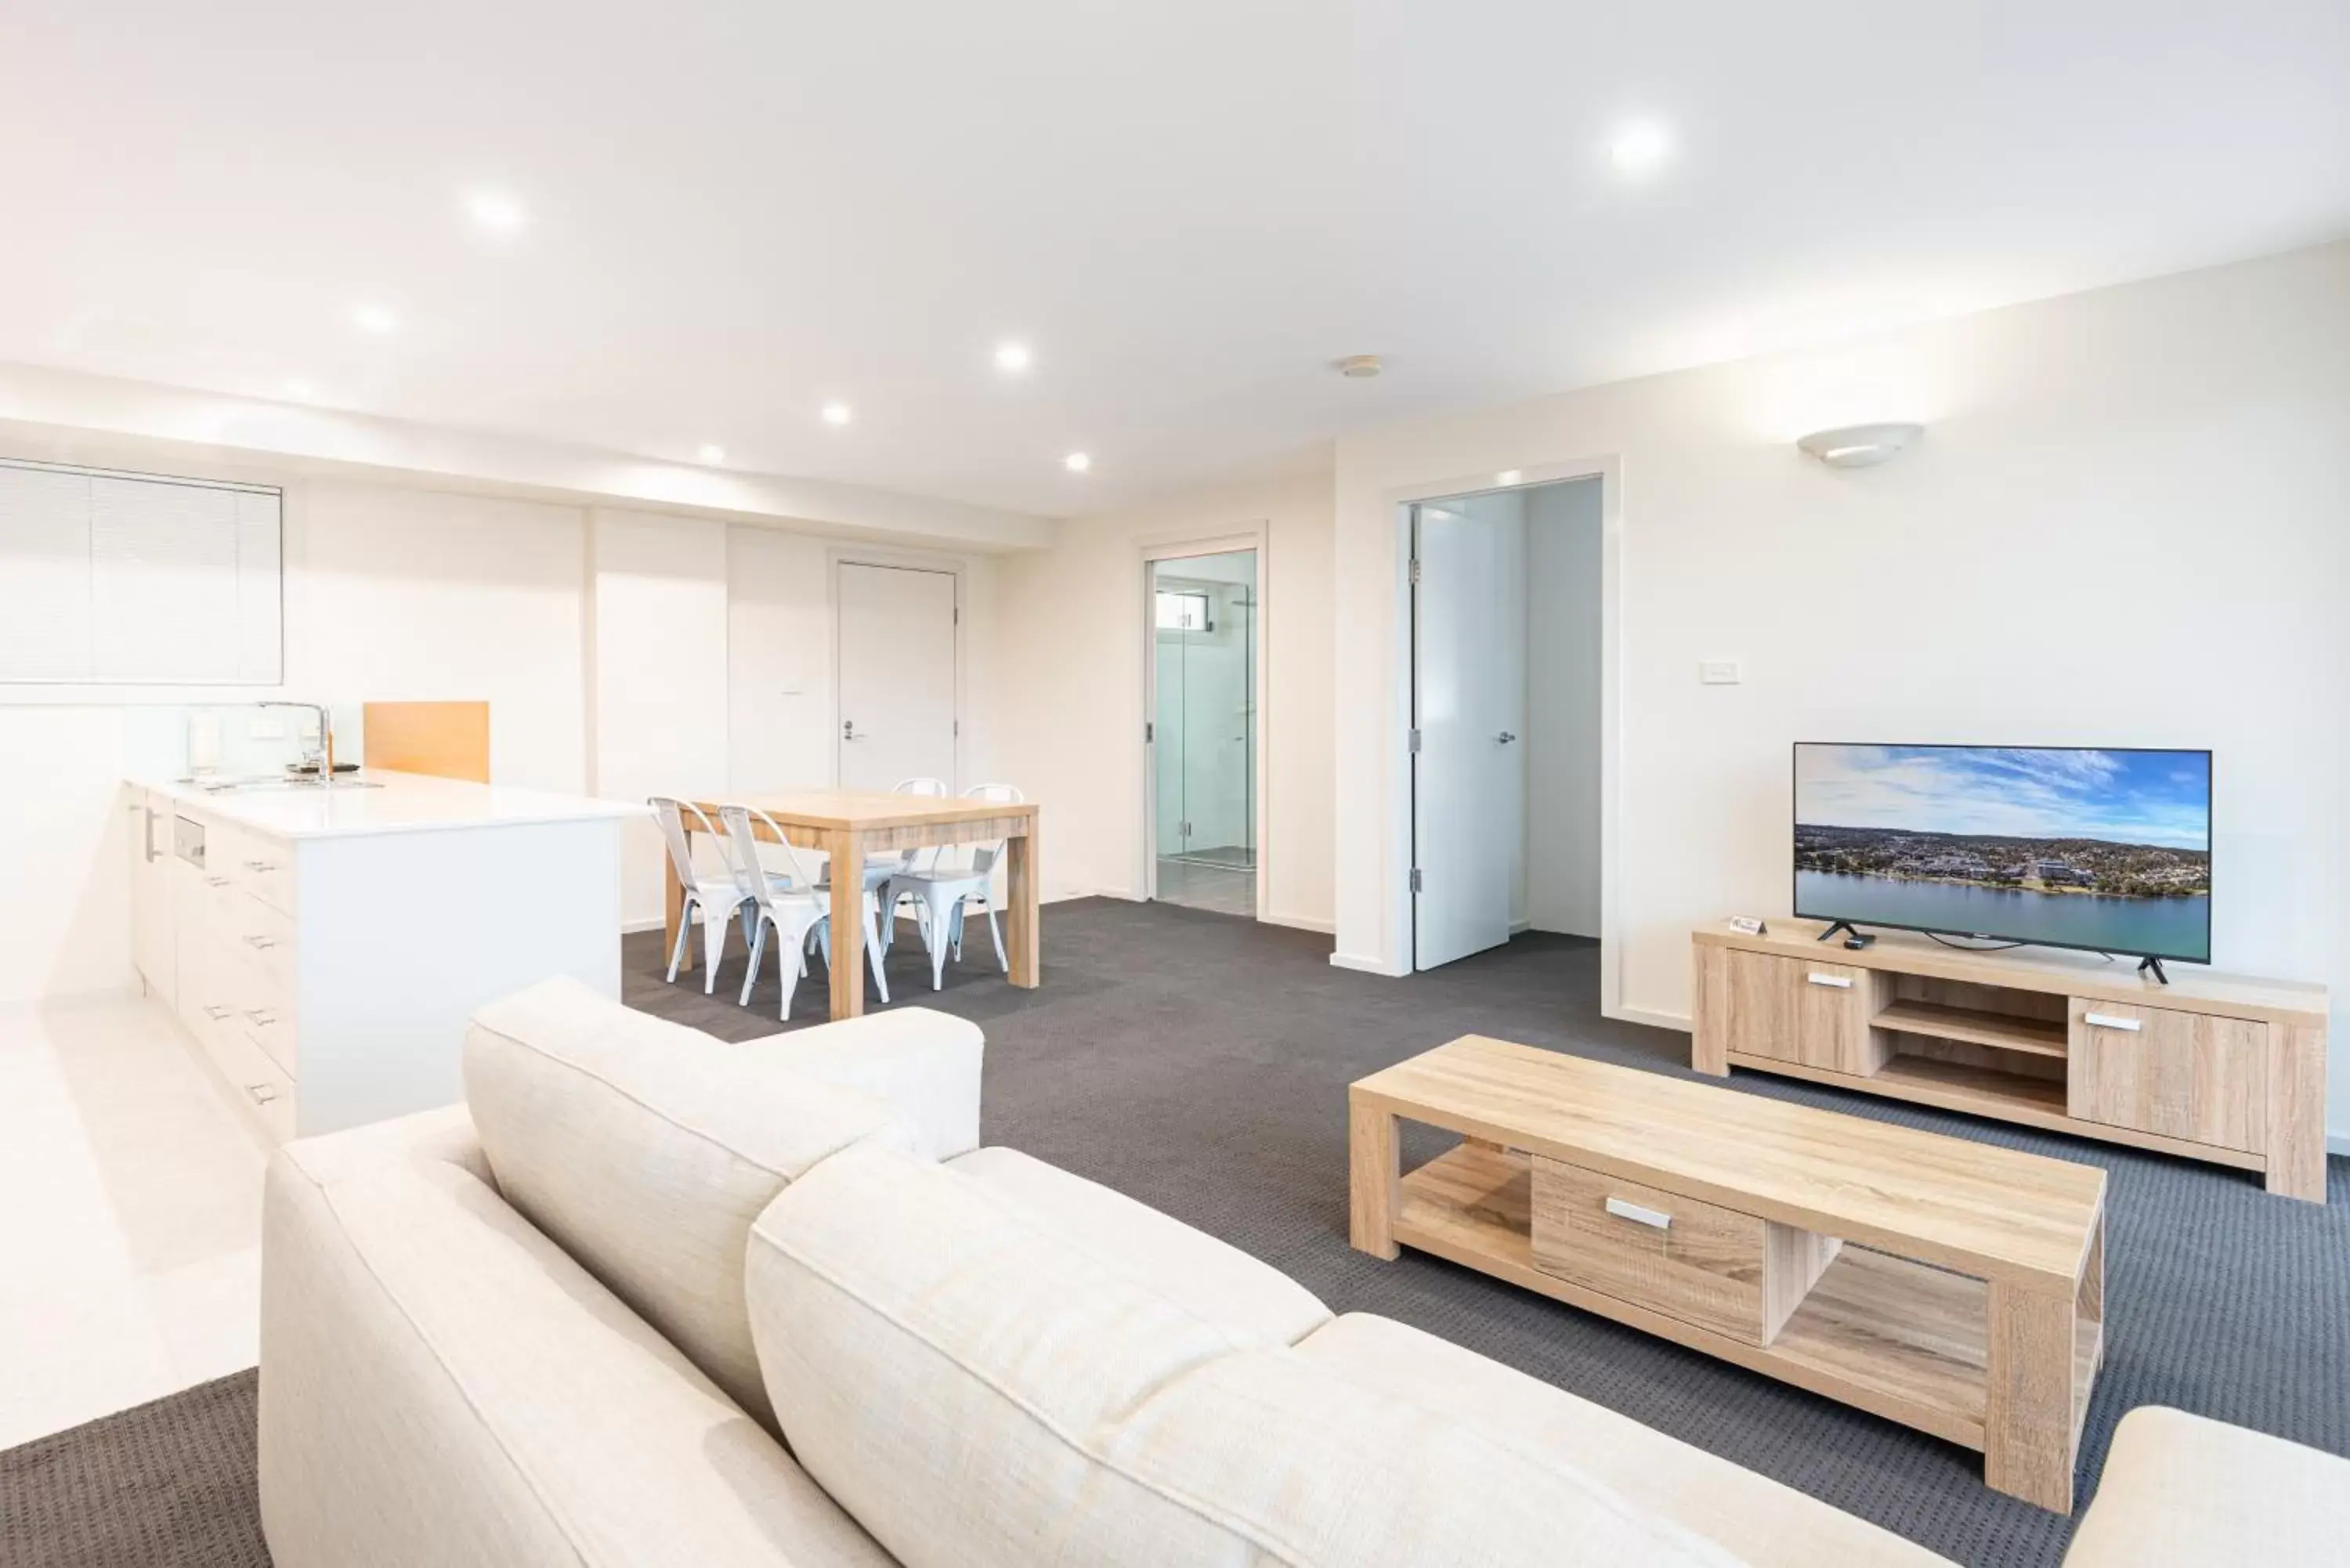 Seating Area in Warners Bay Apartments